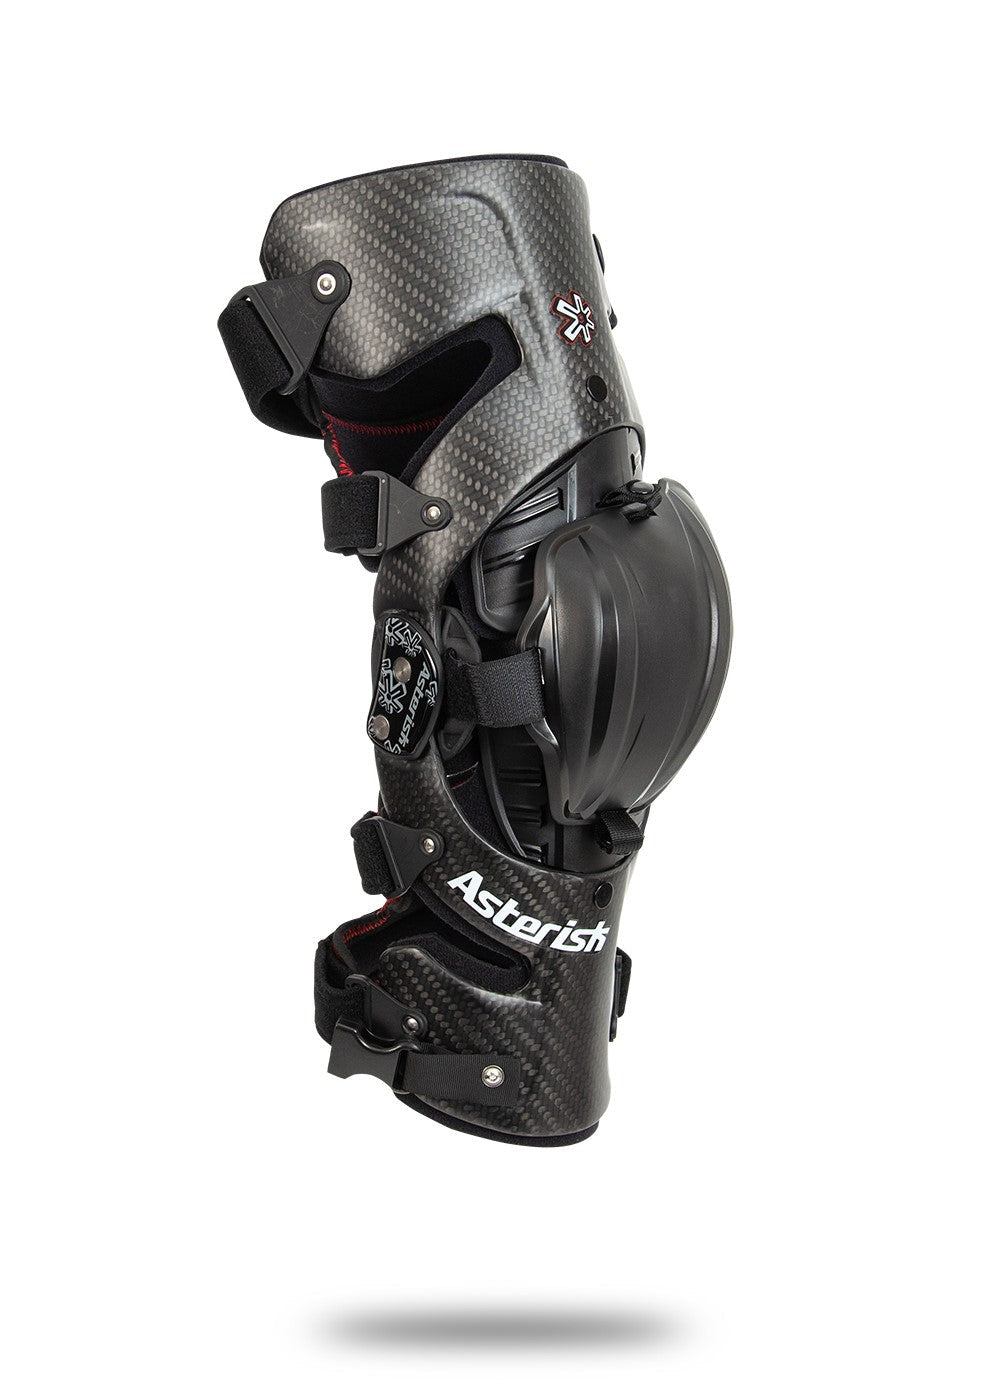 Asterisk Cell 1.0 Knee Brace - Carbon - Right